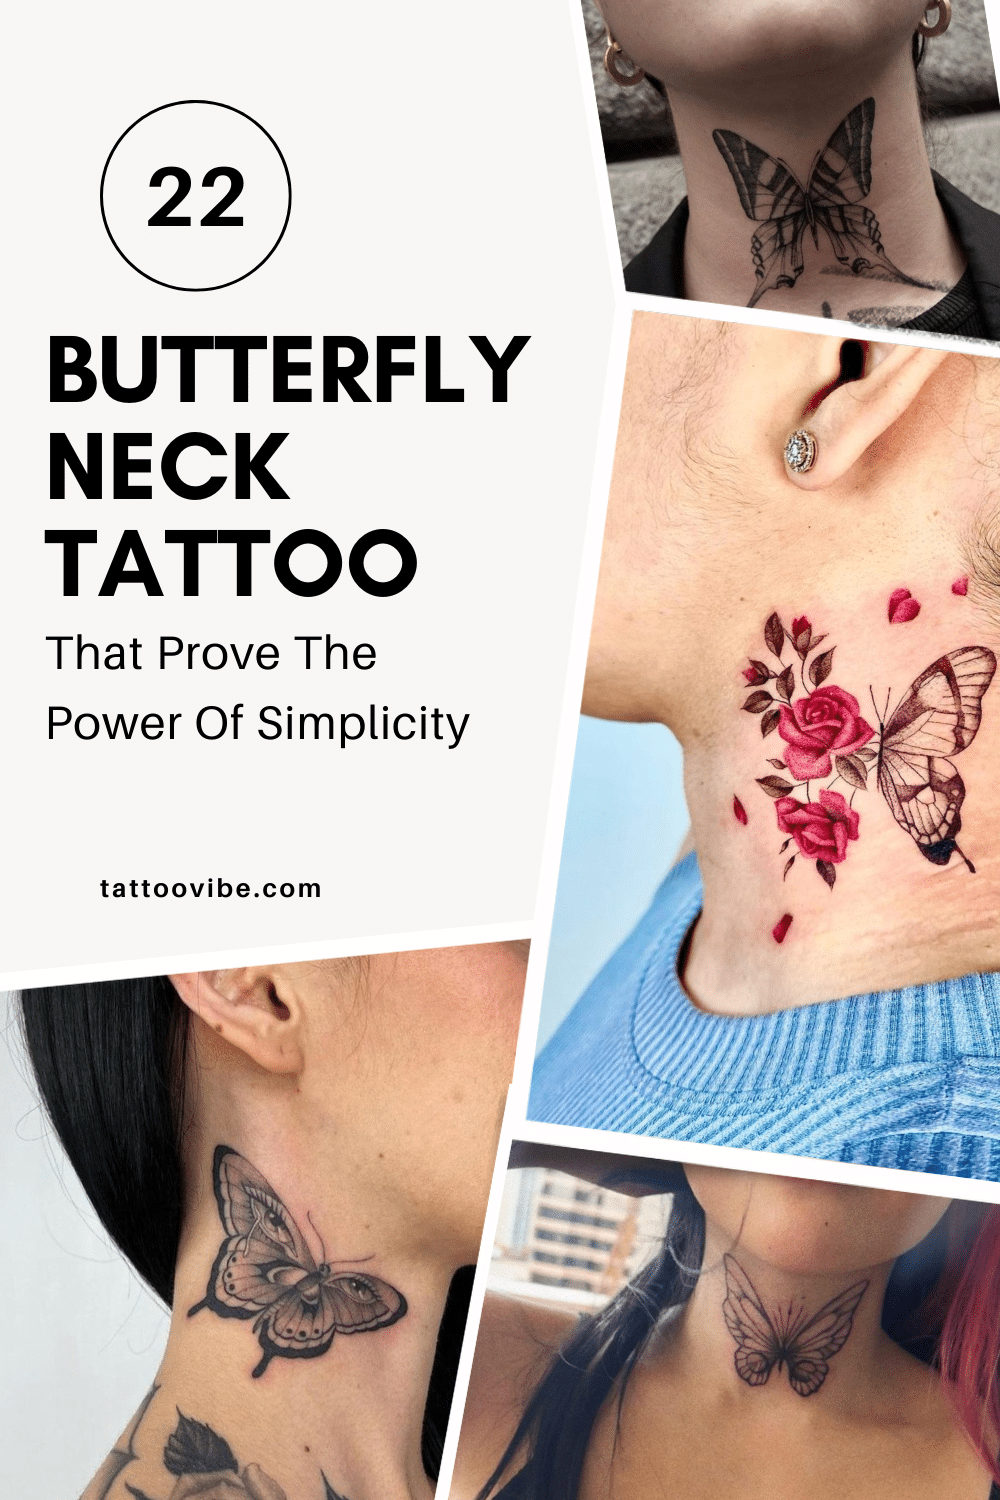 22 Butterfly Neck Tattoos That Prove The Power Of Simplicity